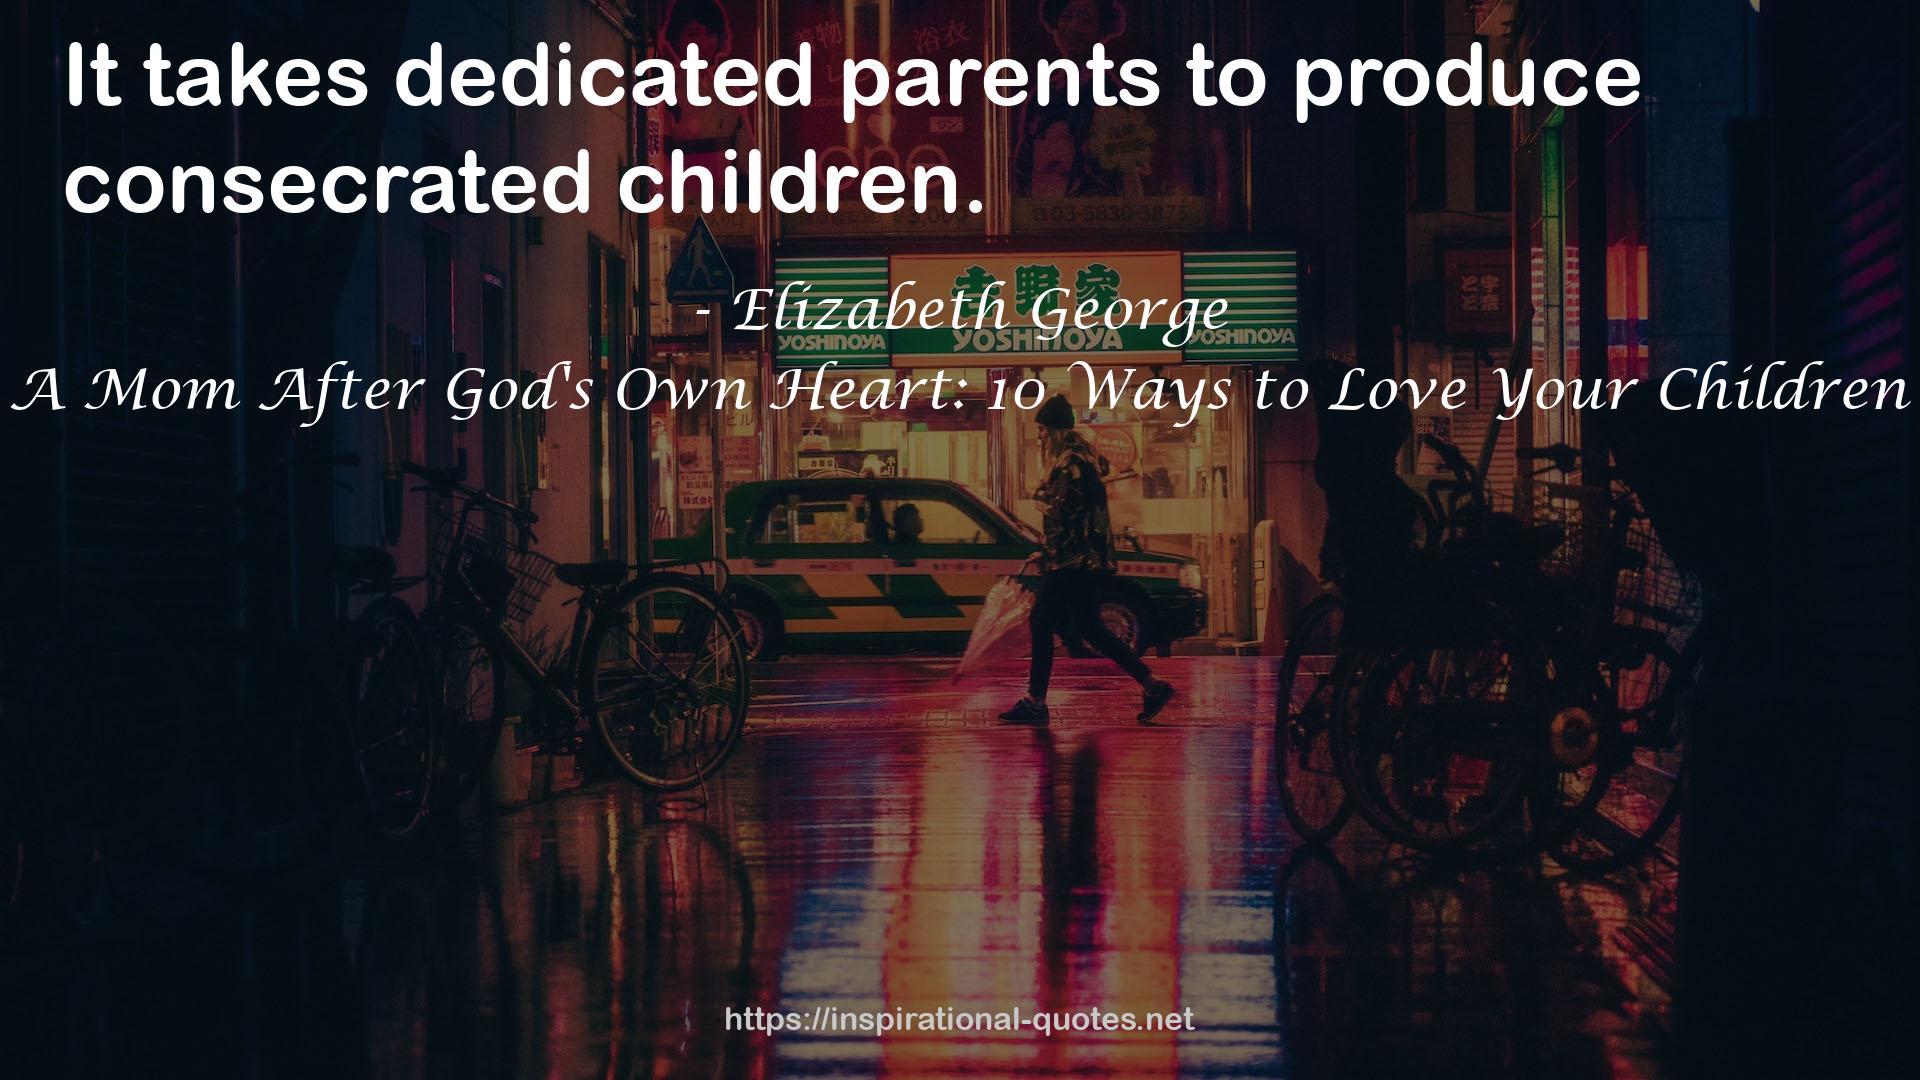 A Mom After God's Own Heart: 10 Ways to Love Your Children QUOTES